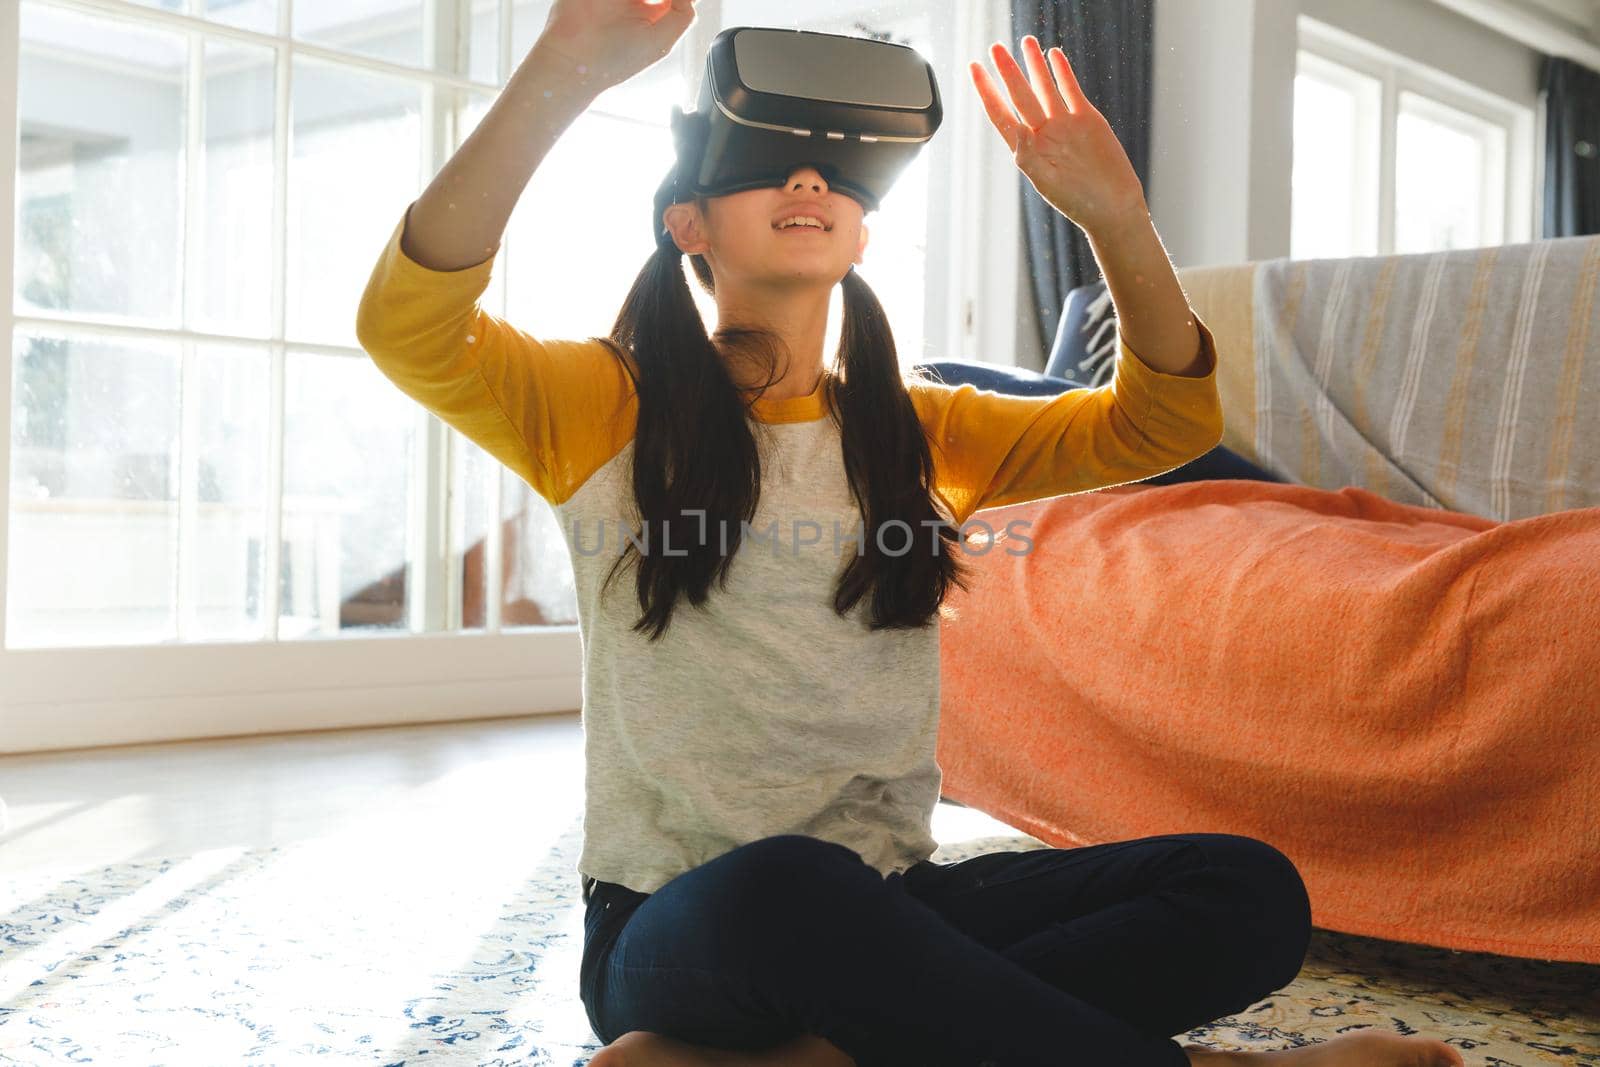 Asian girl sitting in living room and using vr headset. childhood leisure time and discovery using technology at home.